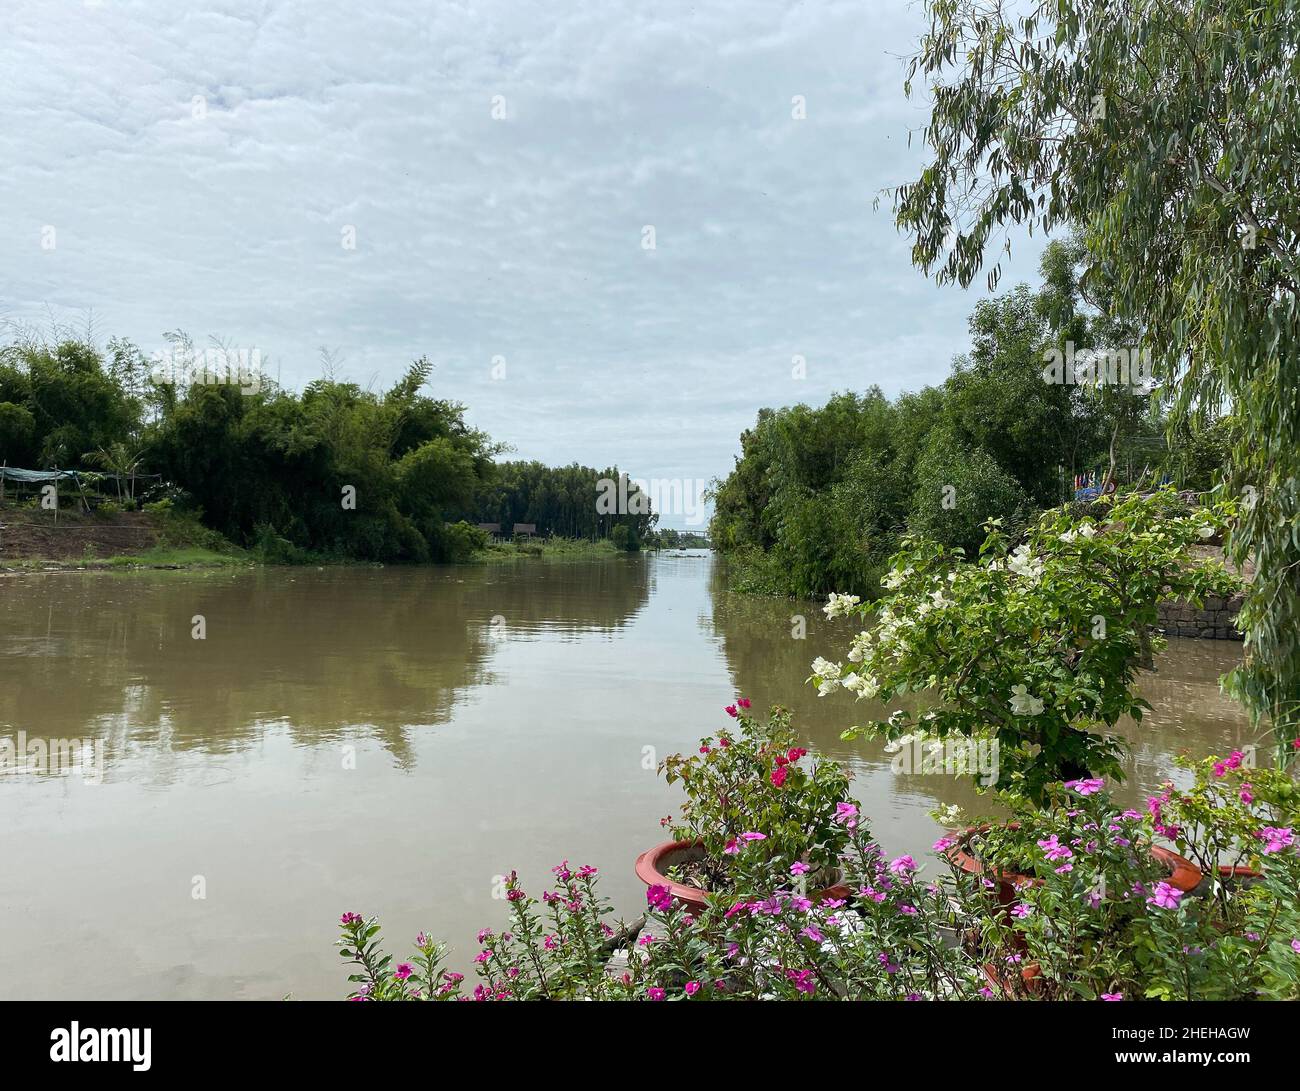 River scene with tropical forest in Mekong Delta, Vietnam. Stock Photo